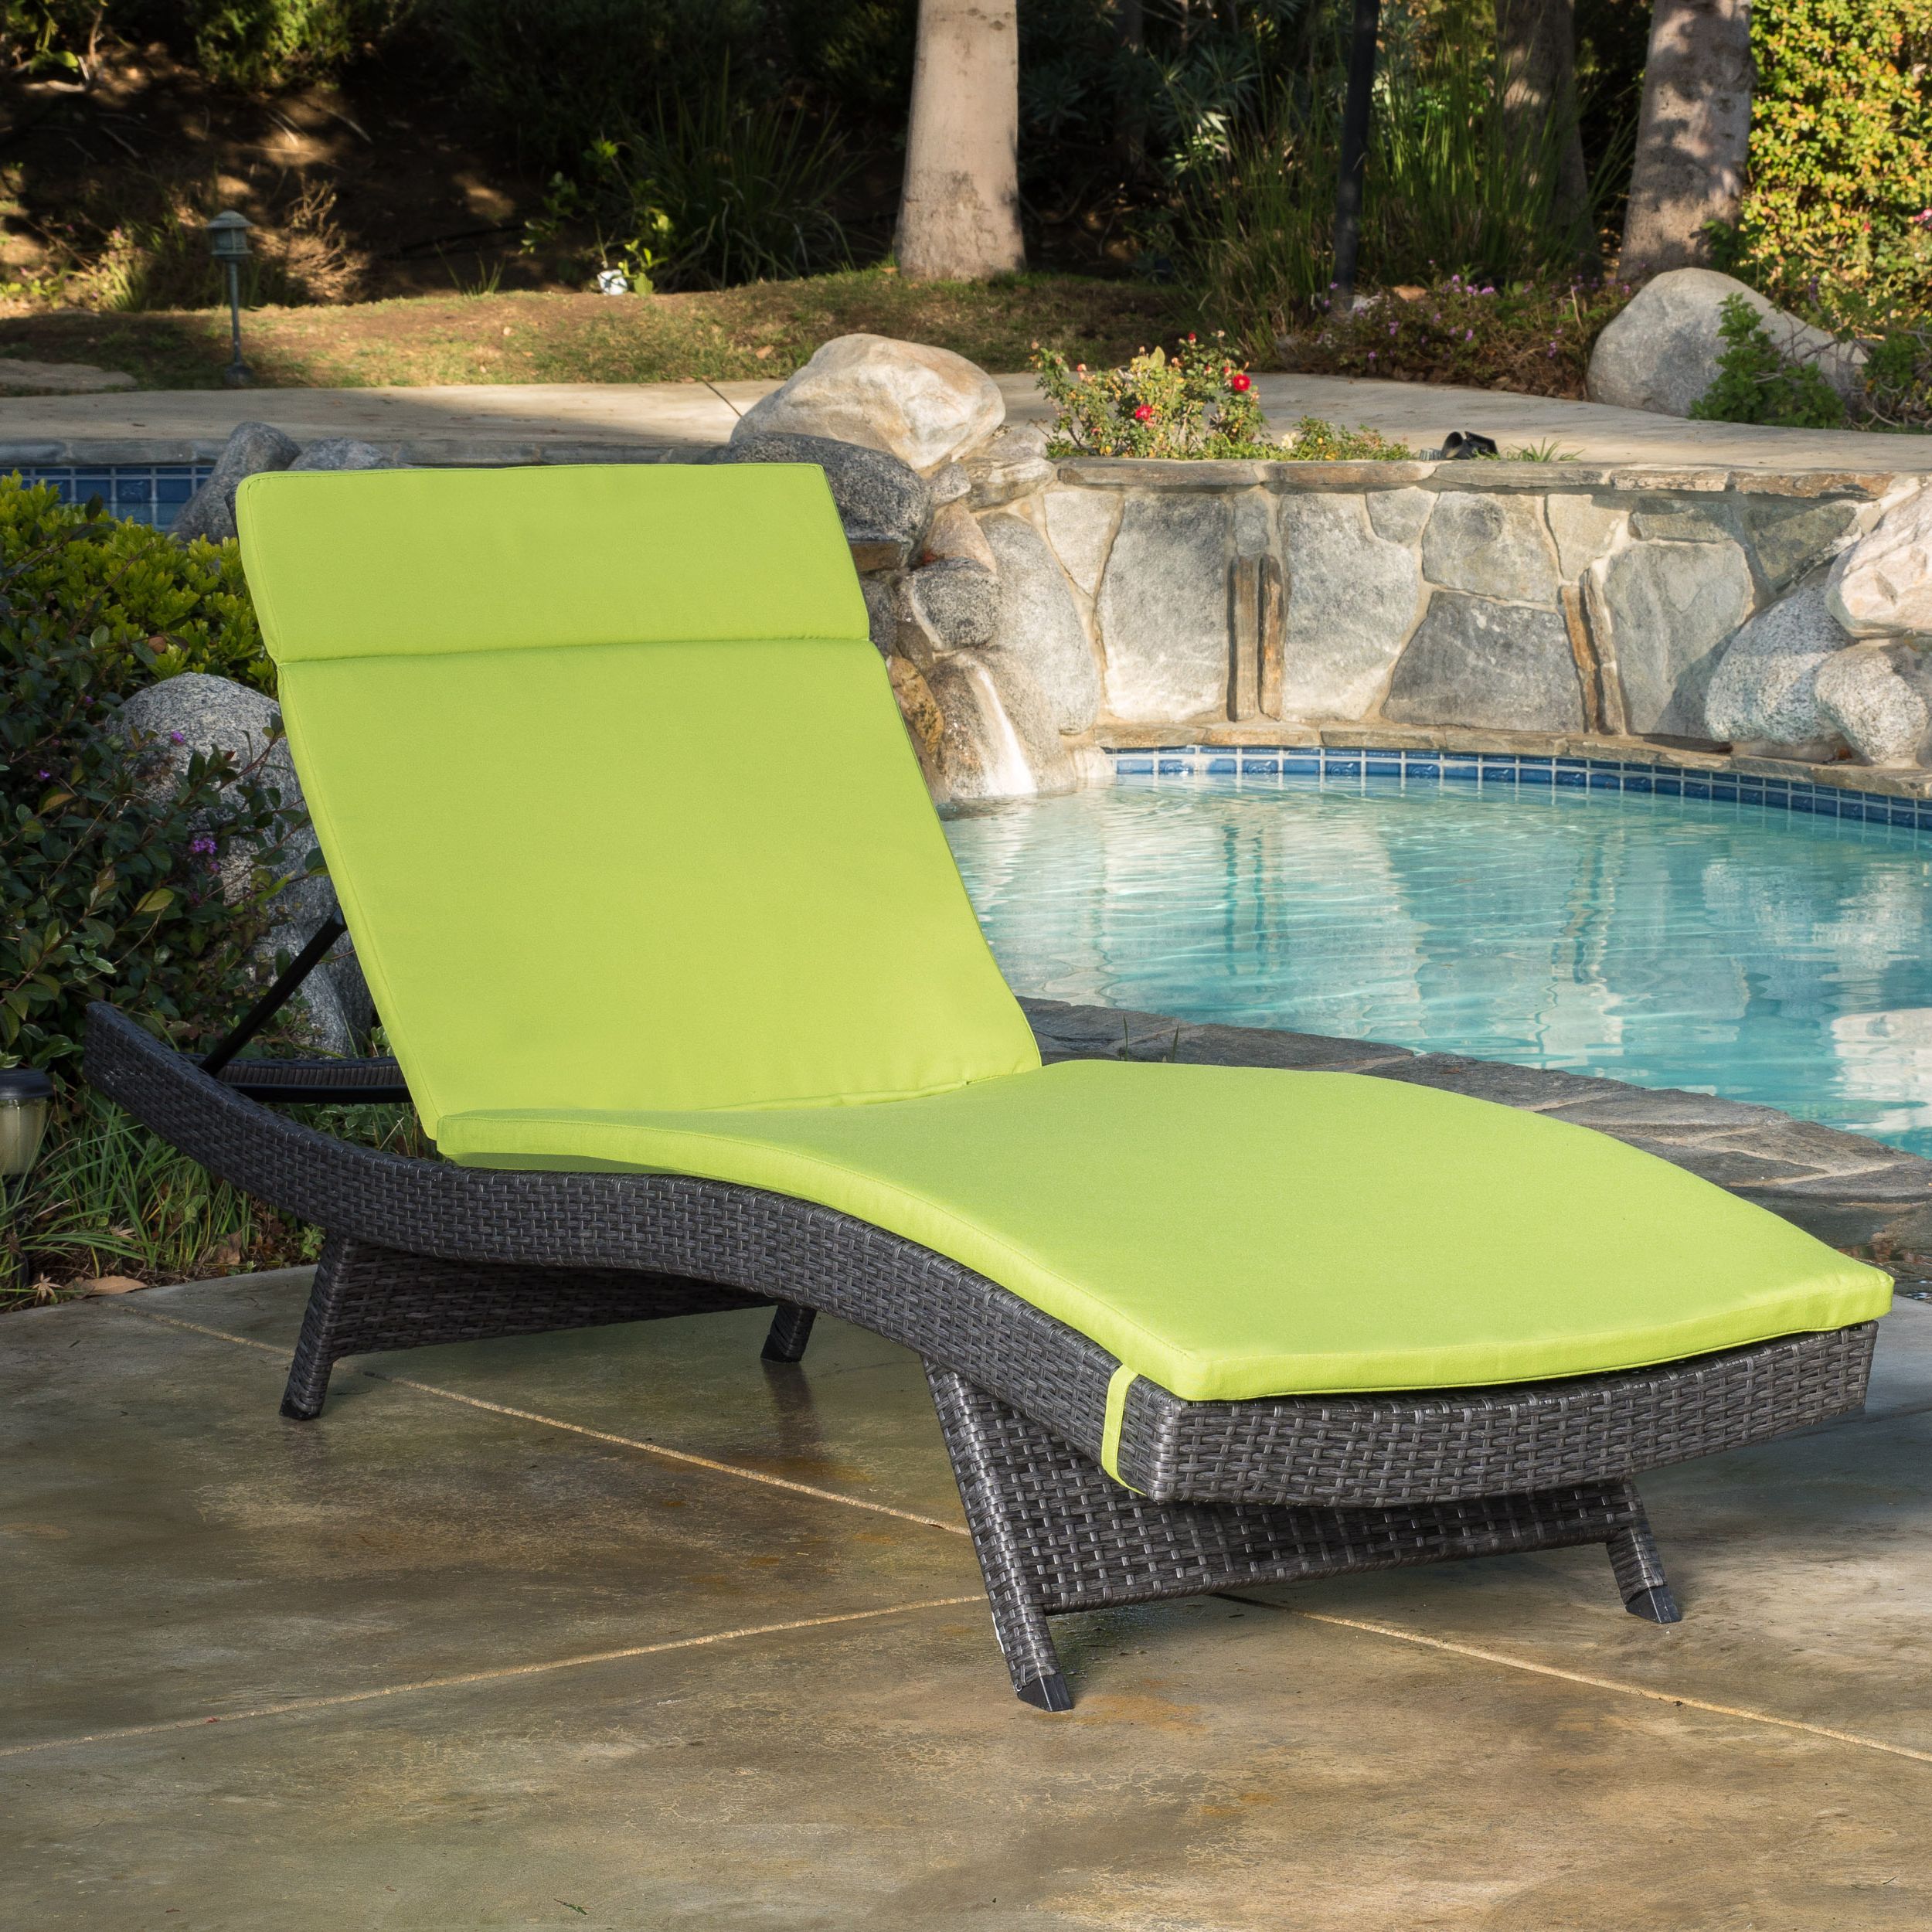 Anthony Outdoor Wicker Adjustable Chaise Lounge With Cushion, Grey, Green Within Popular Wicker Adjustable Chaise Loungers With Cushion (View 19 of 25)